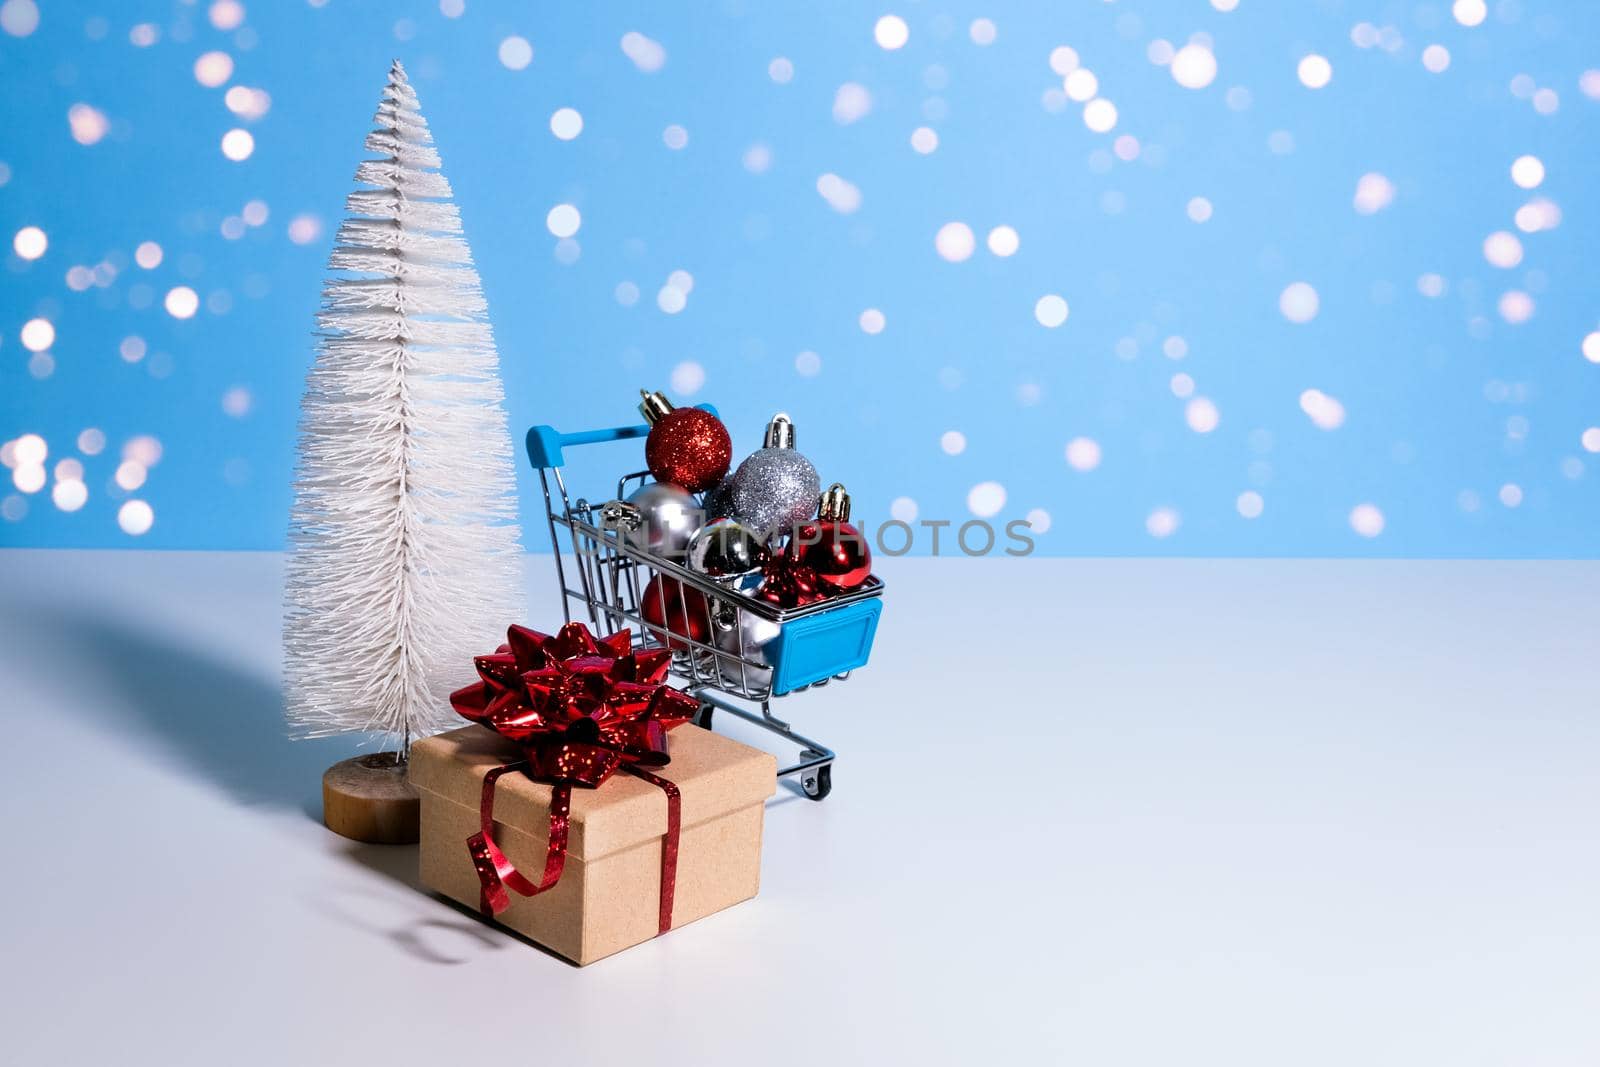 Beautiful Christmas or New Year banner with copy space. Toy Christmas tree, gift box with red bow and shopping trolley full of Christmas baubles on blue background with blurred lights.